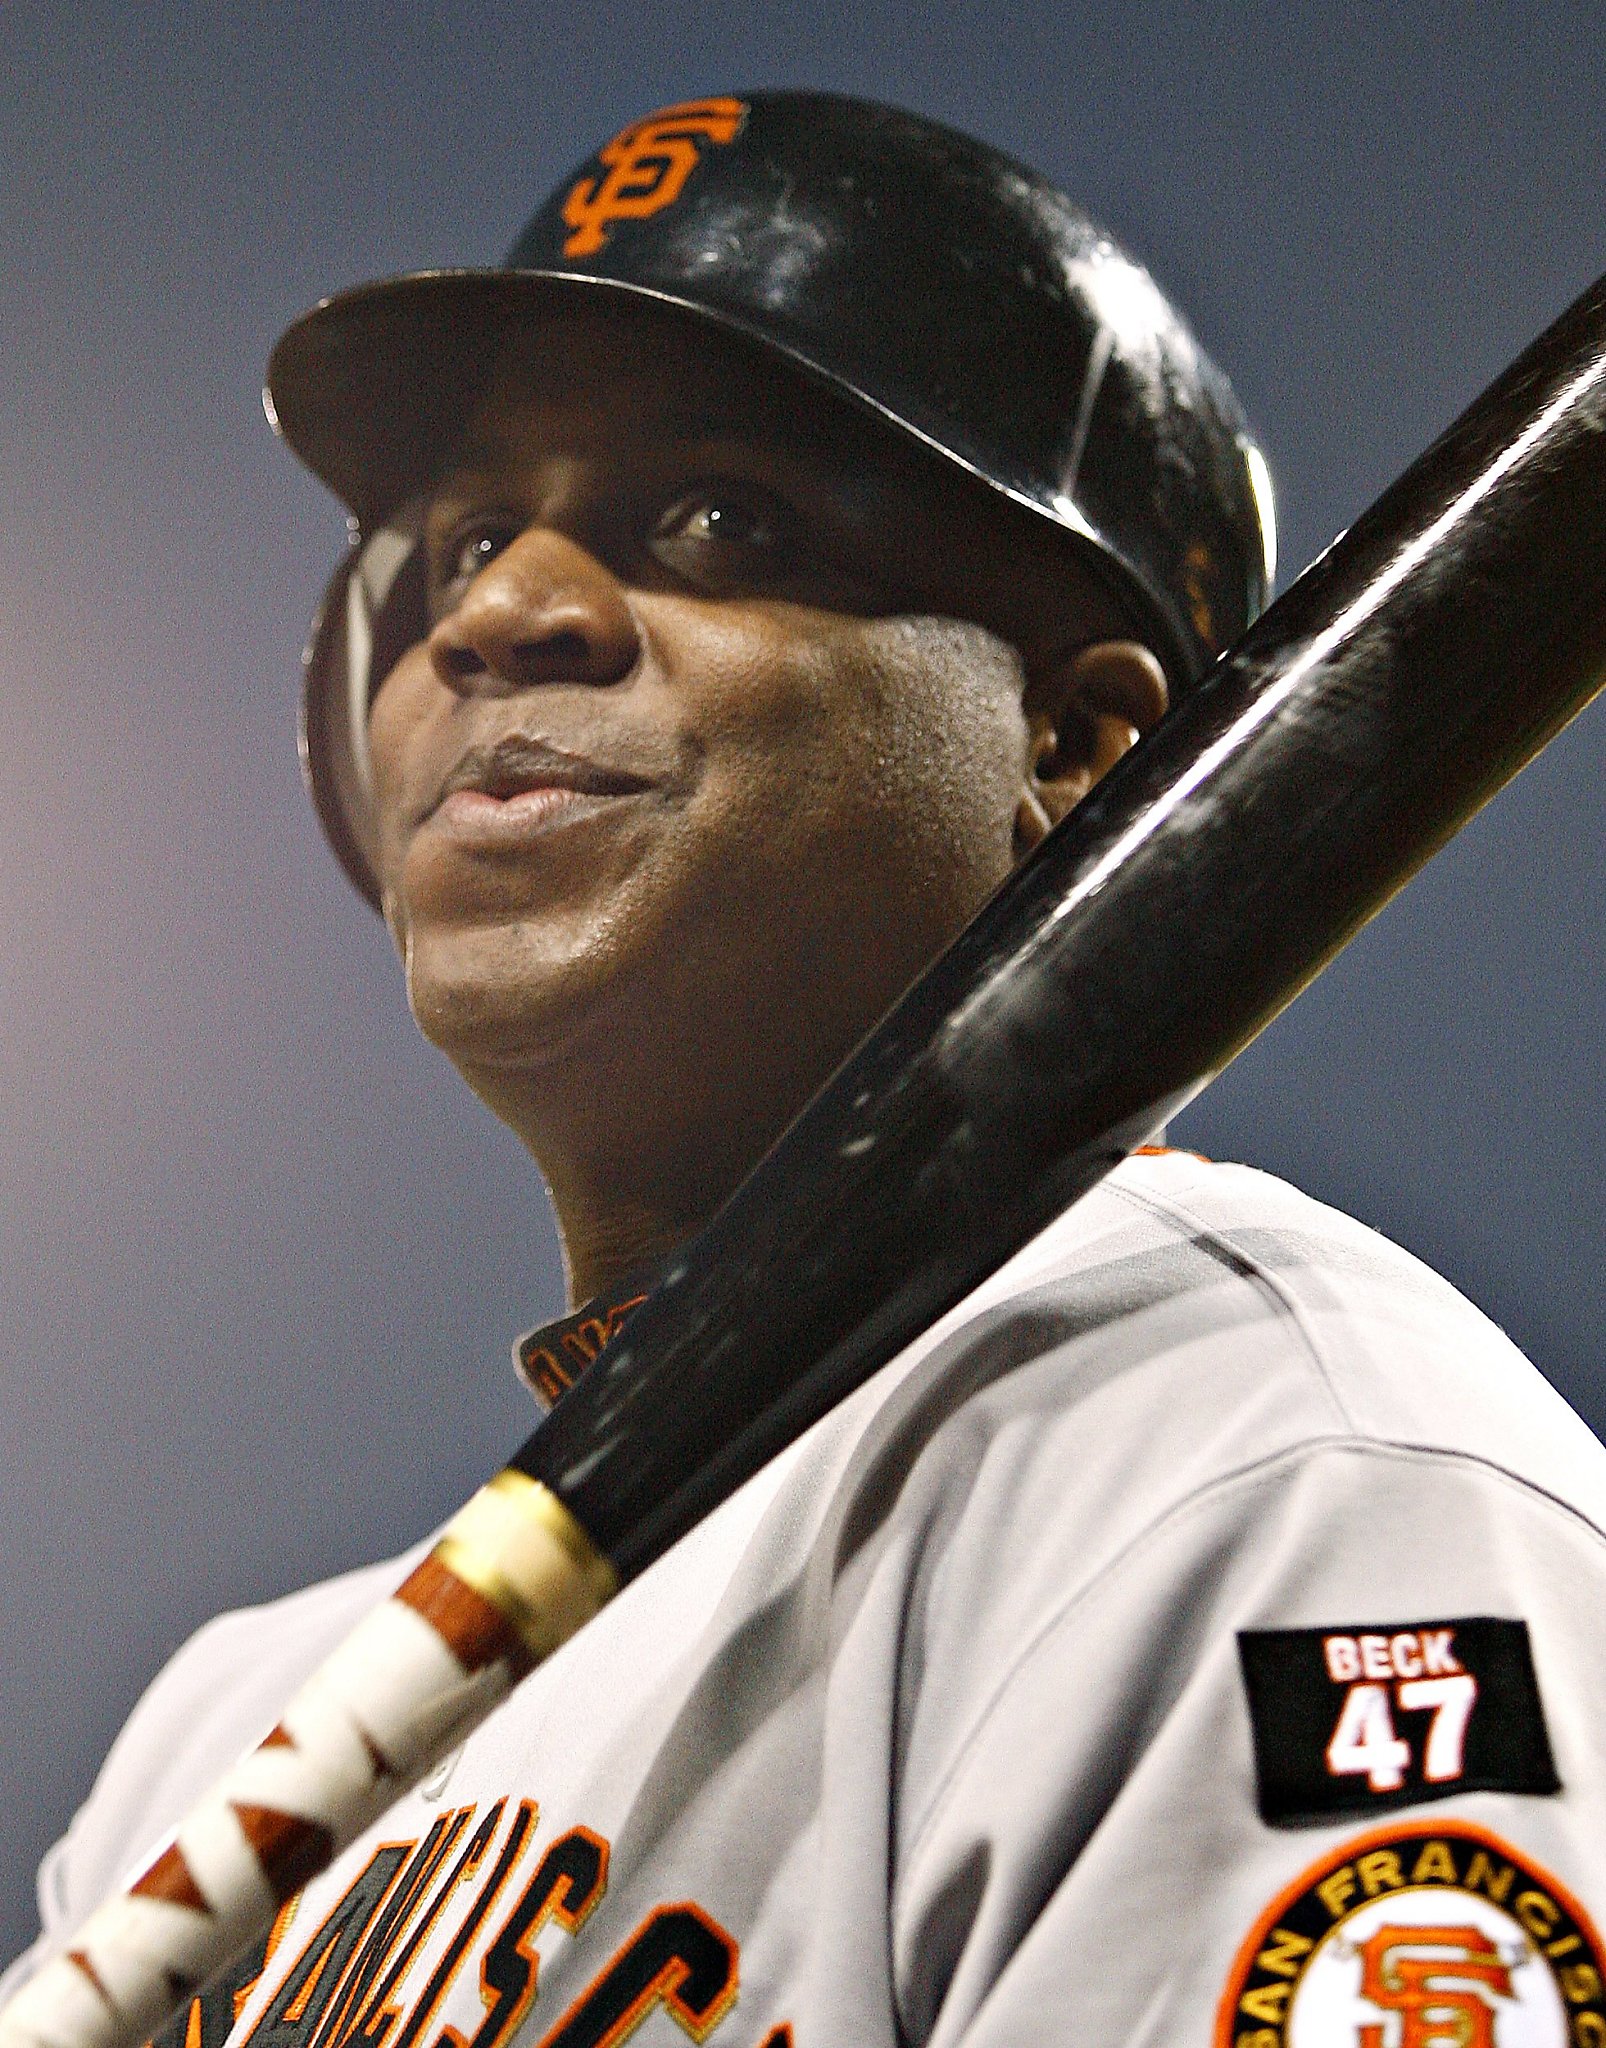 Giants say team will retire Bonds' jersey against Pirates – The